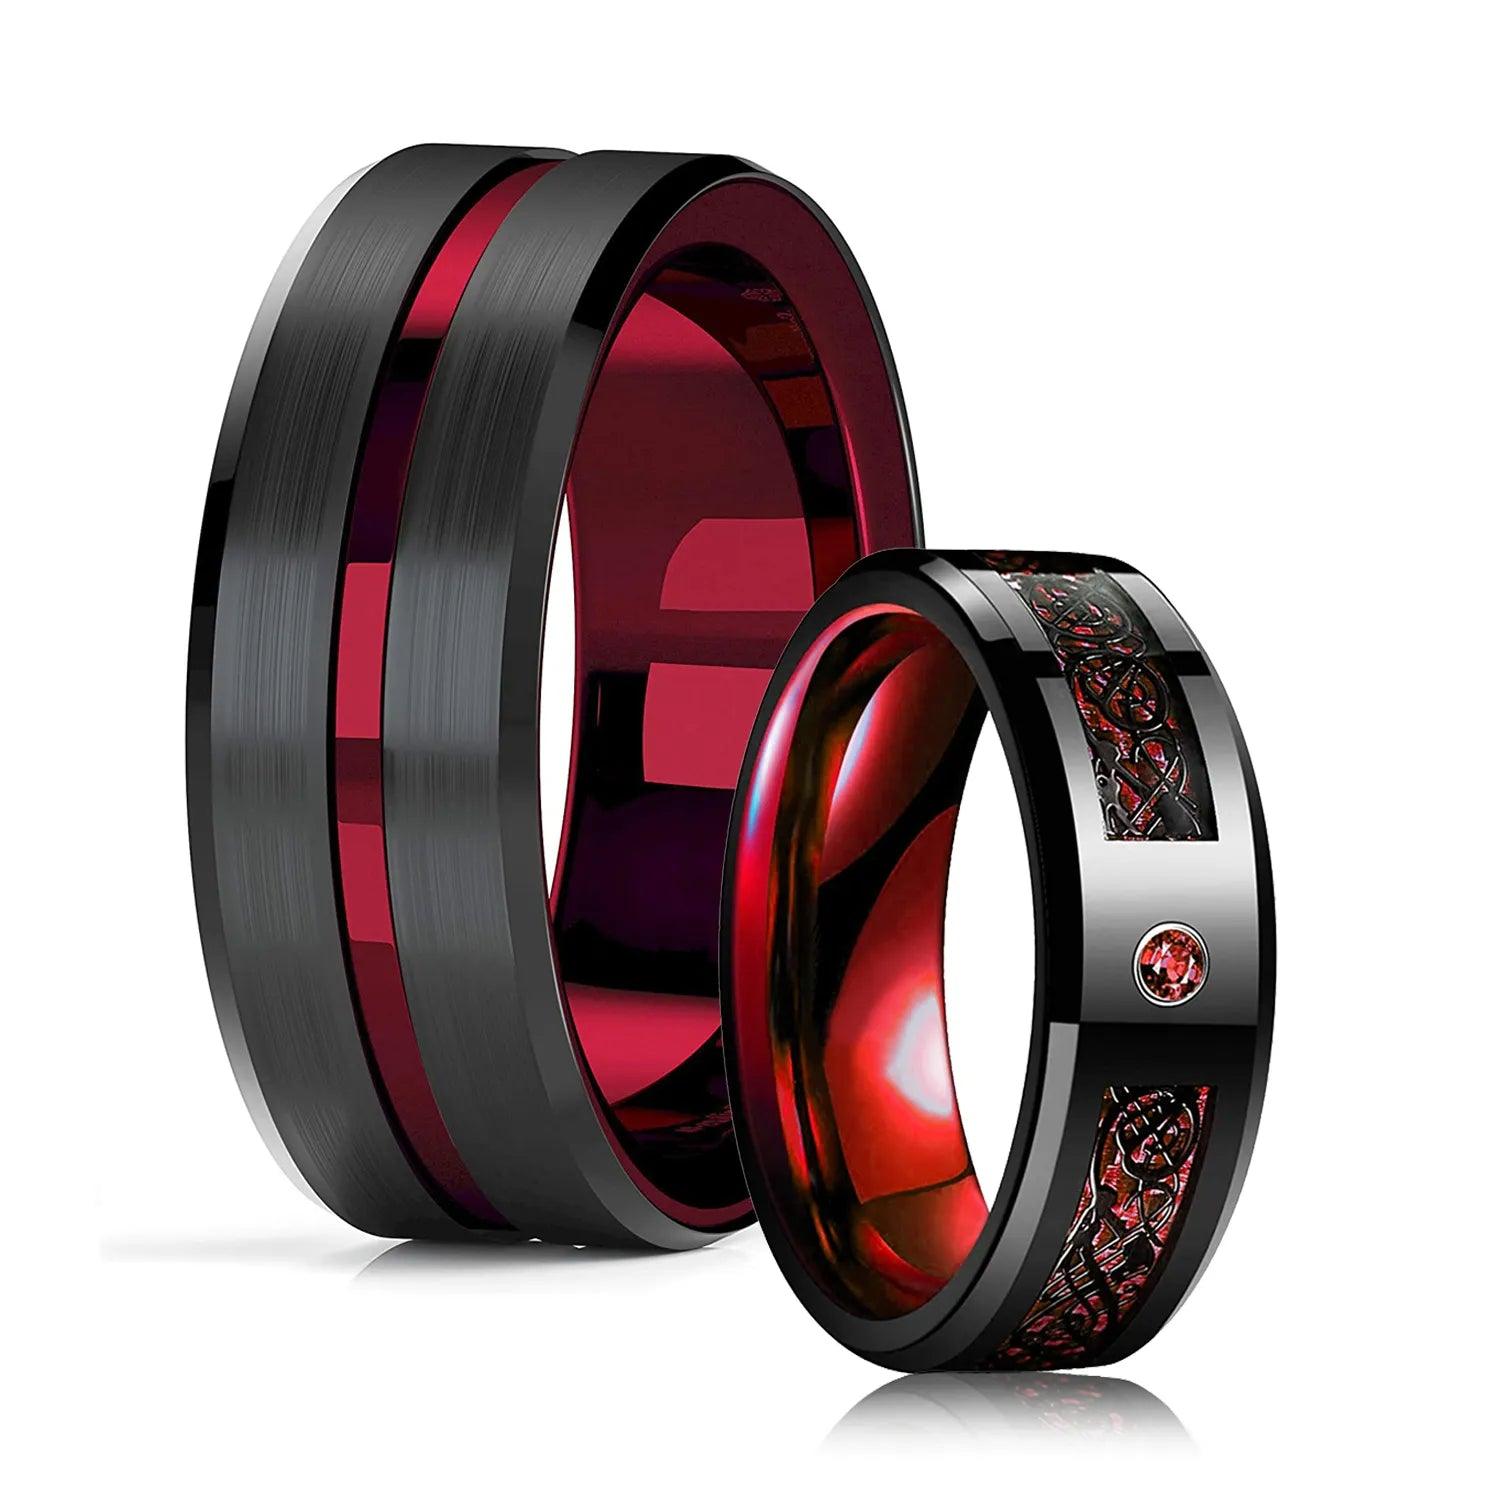 Dragon Rings
(Category_3)SPECIFICATIONS
 
Brand Name: None
Metals Type: Stainless Steel
Material: Metal
Gender: Men
Compatibility: All Compatible
Item Type: Rings
Function: Mood Tracker
ModeSouvenir 4 youSouvenirs 4 you